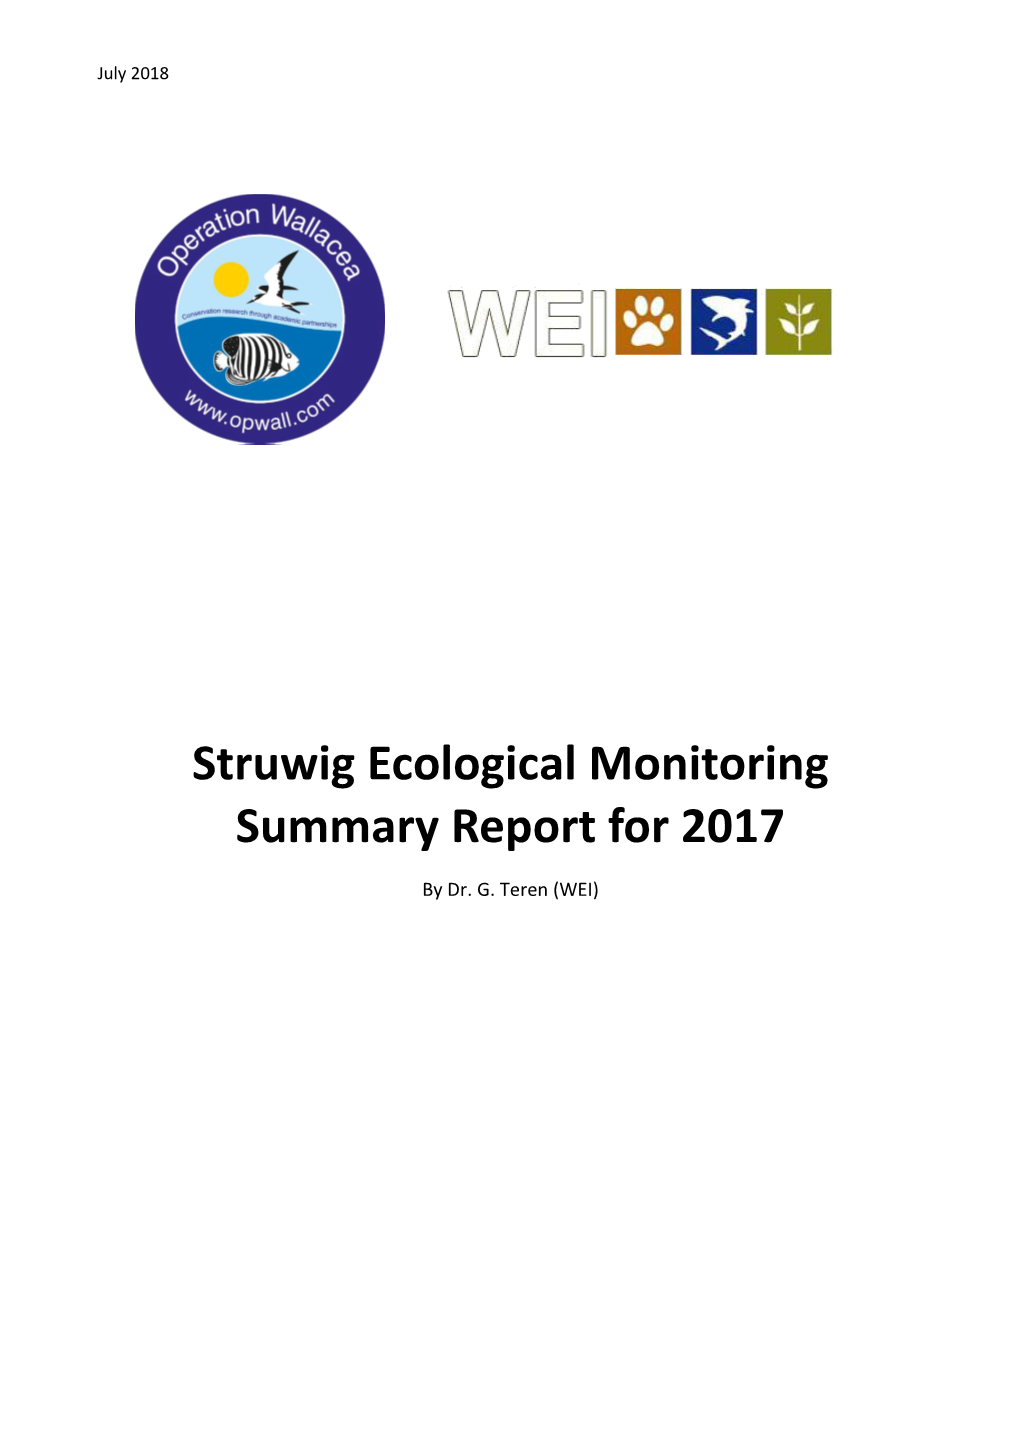 Struwig Ecological Monitoring Summary Report for 2017